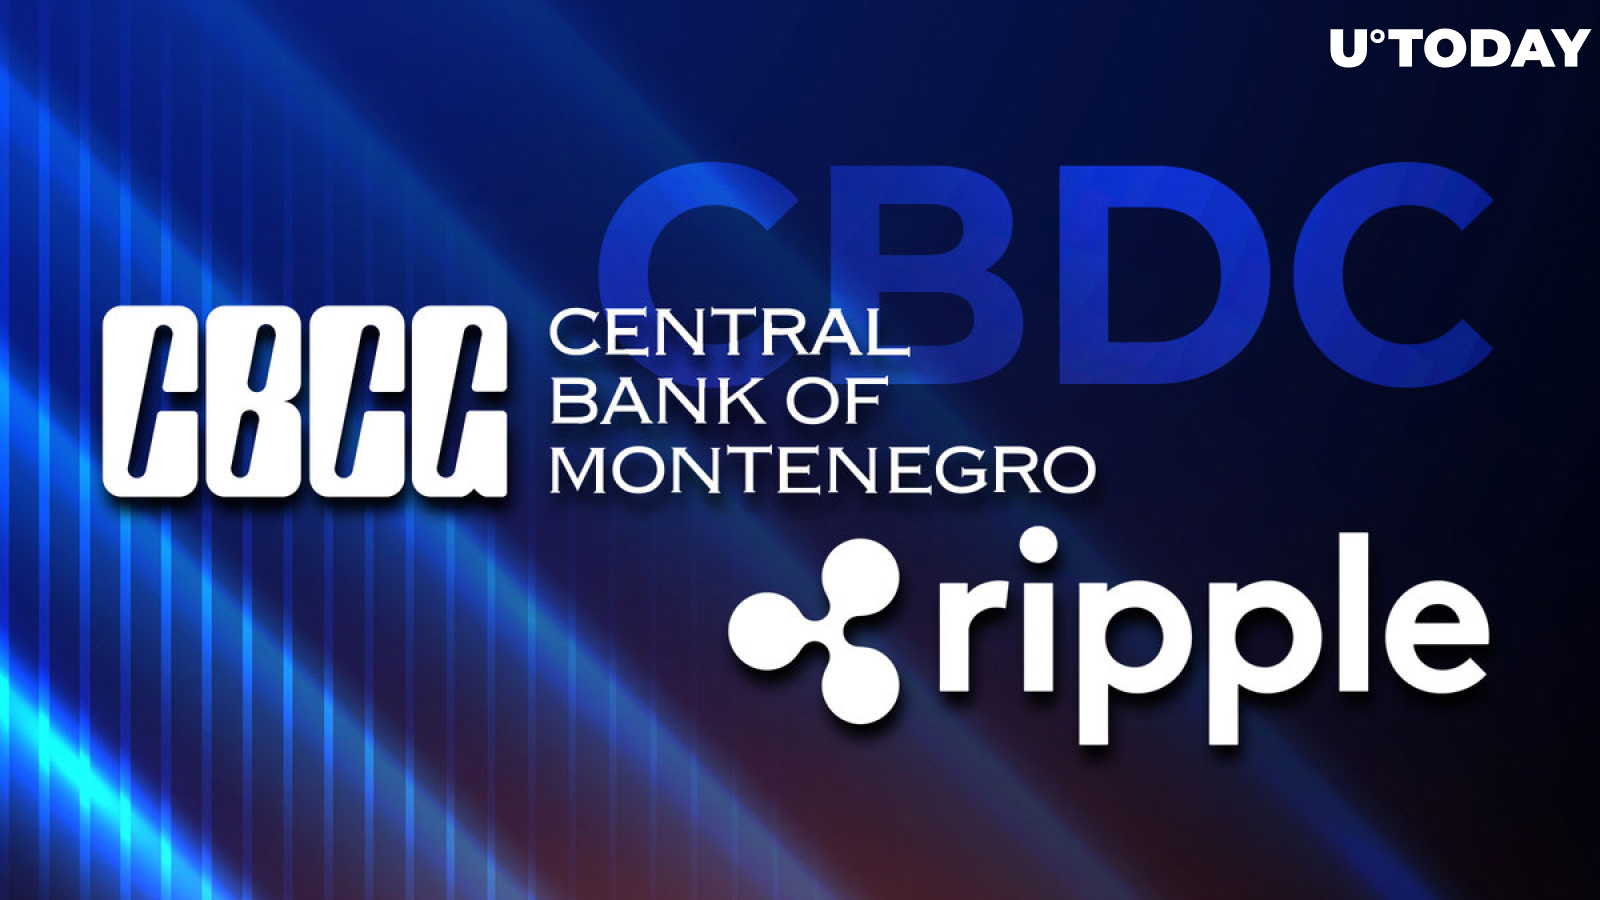 Ripple Partners With Central Bank of Montenegro for CBDC and Stablecoin Developments